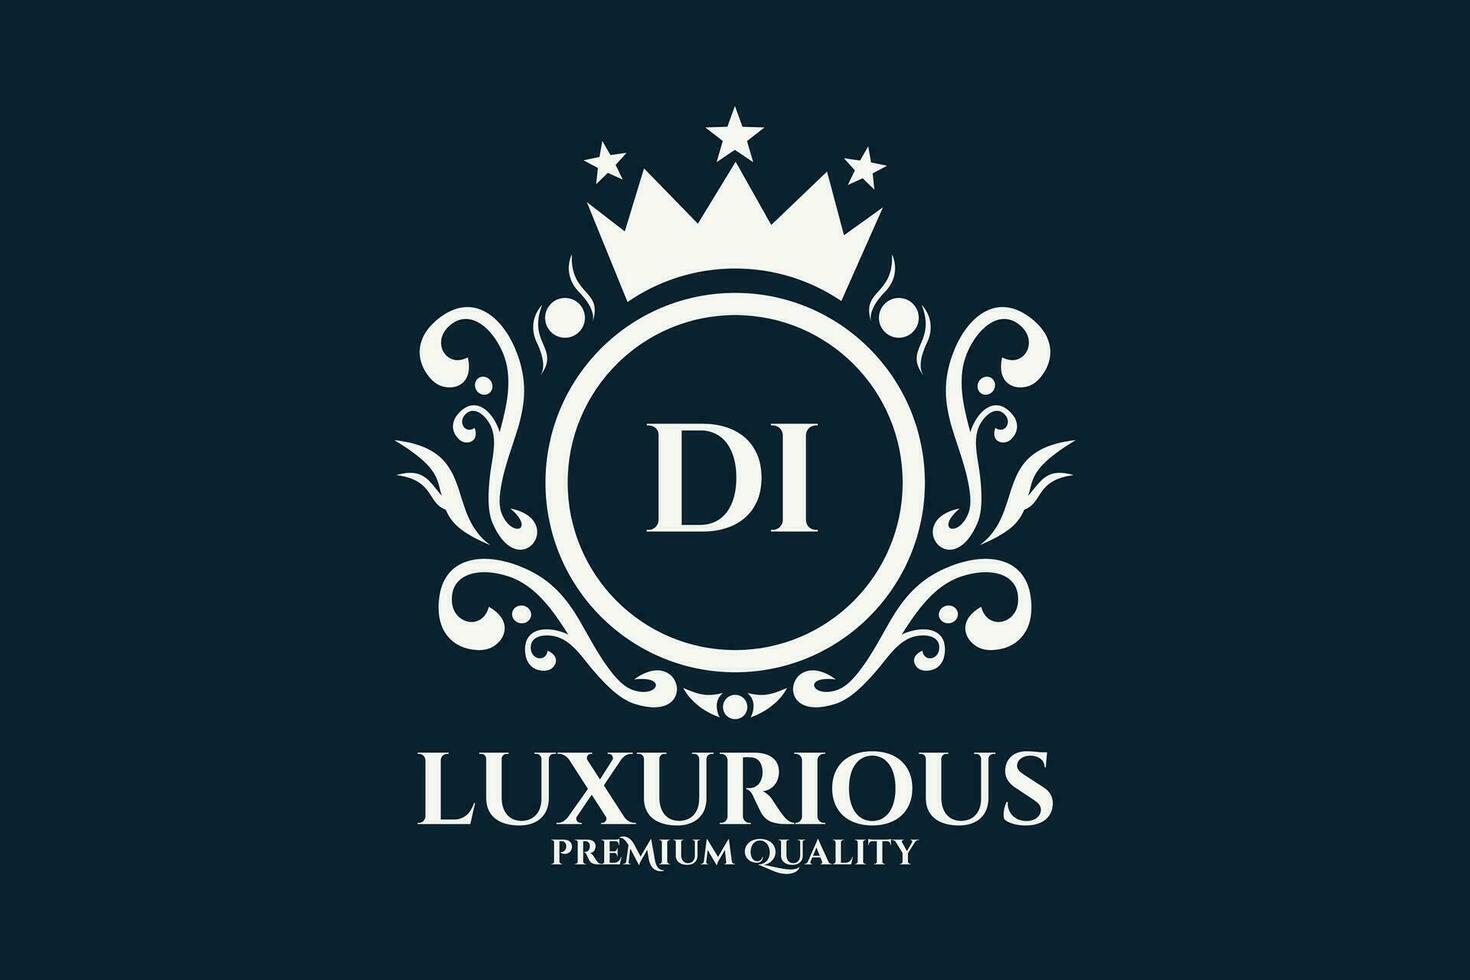 Initial  Letter DI Royal Luxury Logo template in vector art for luxurious branding  vector illustration.